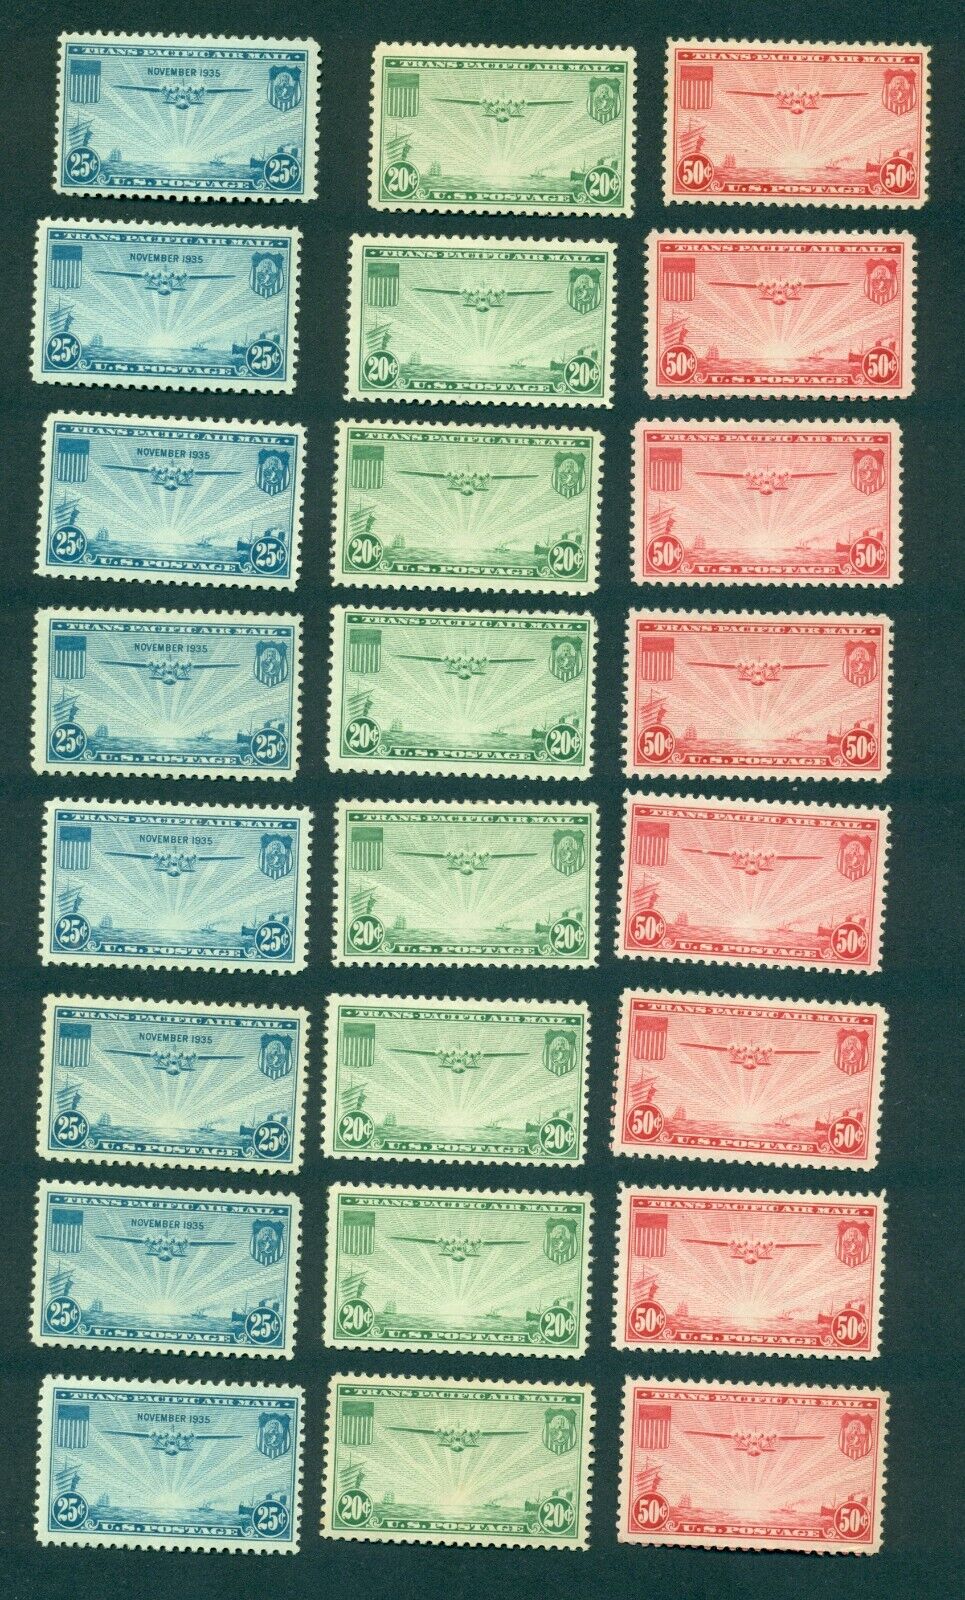 US Stamps Collection Lot J55 Ranking TOP6 C20 PH 8 Unused 55% OFF thru C22 sets